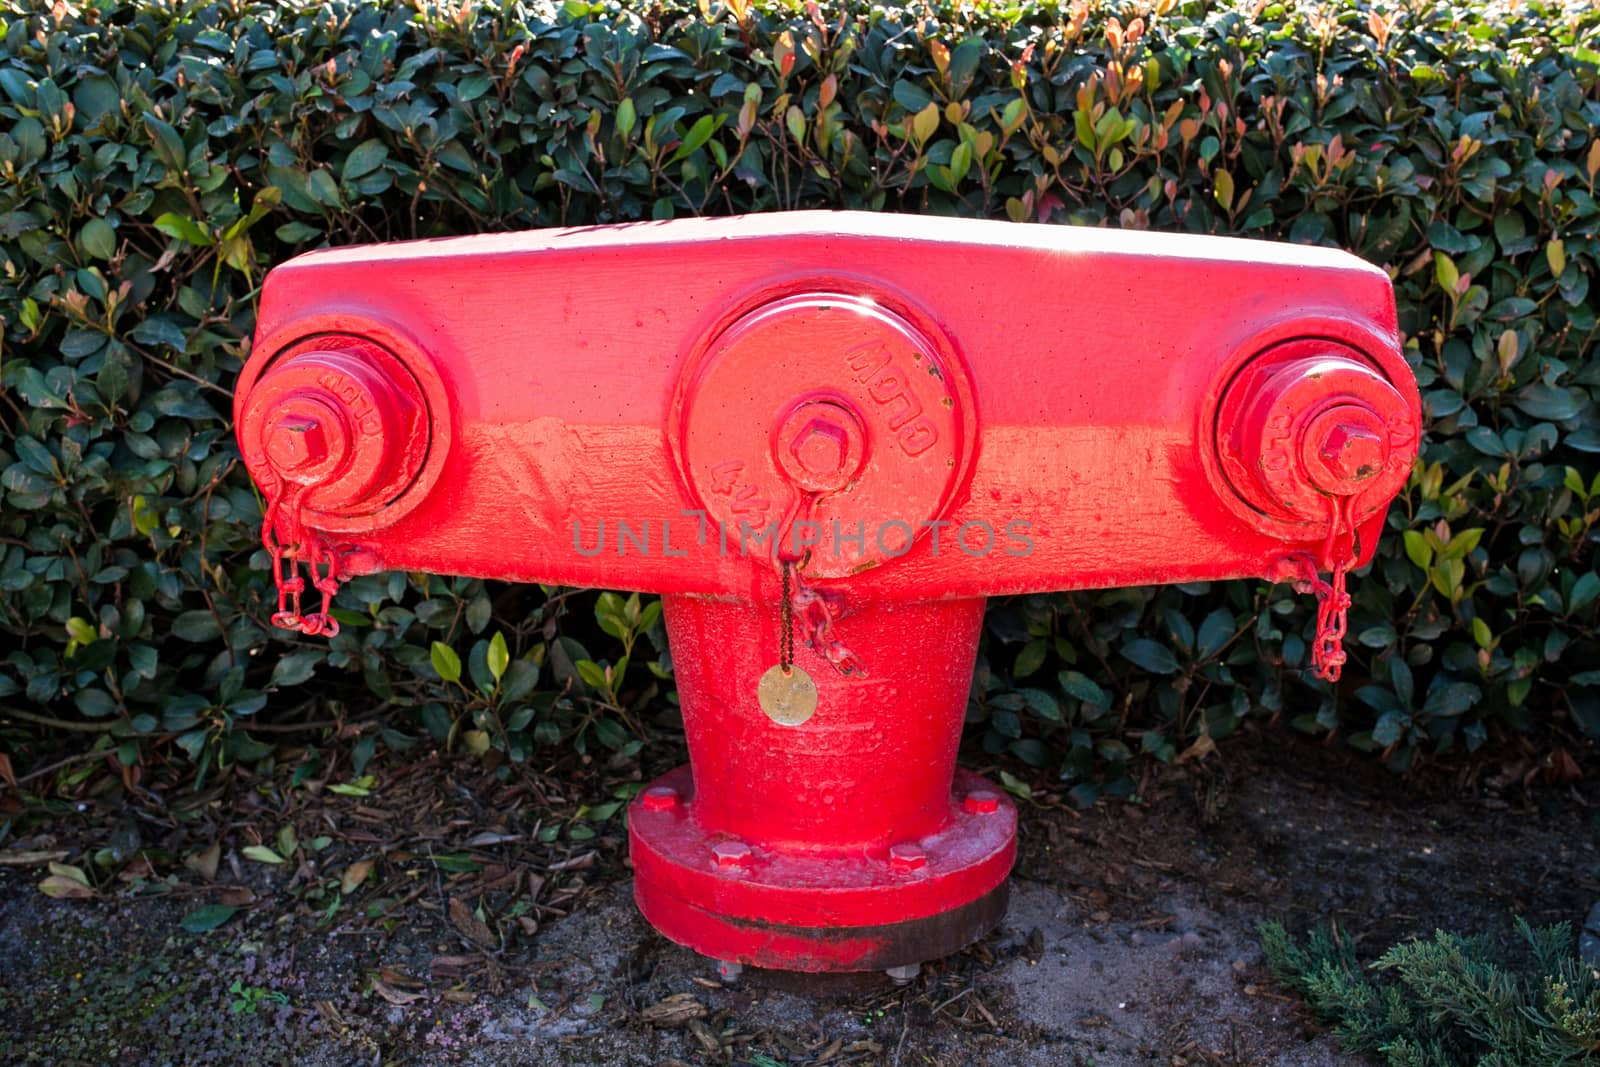 A red fire hydrant, an unusual shape